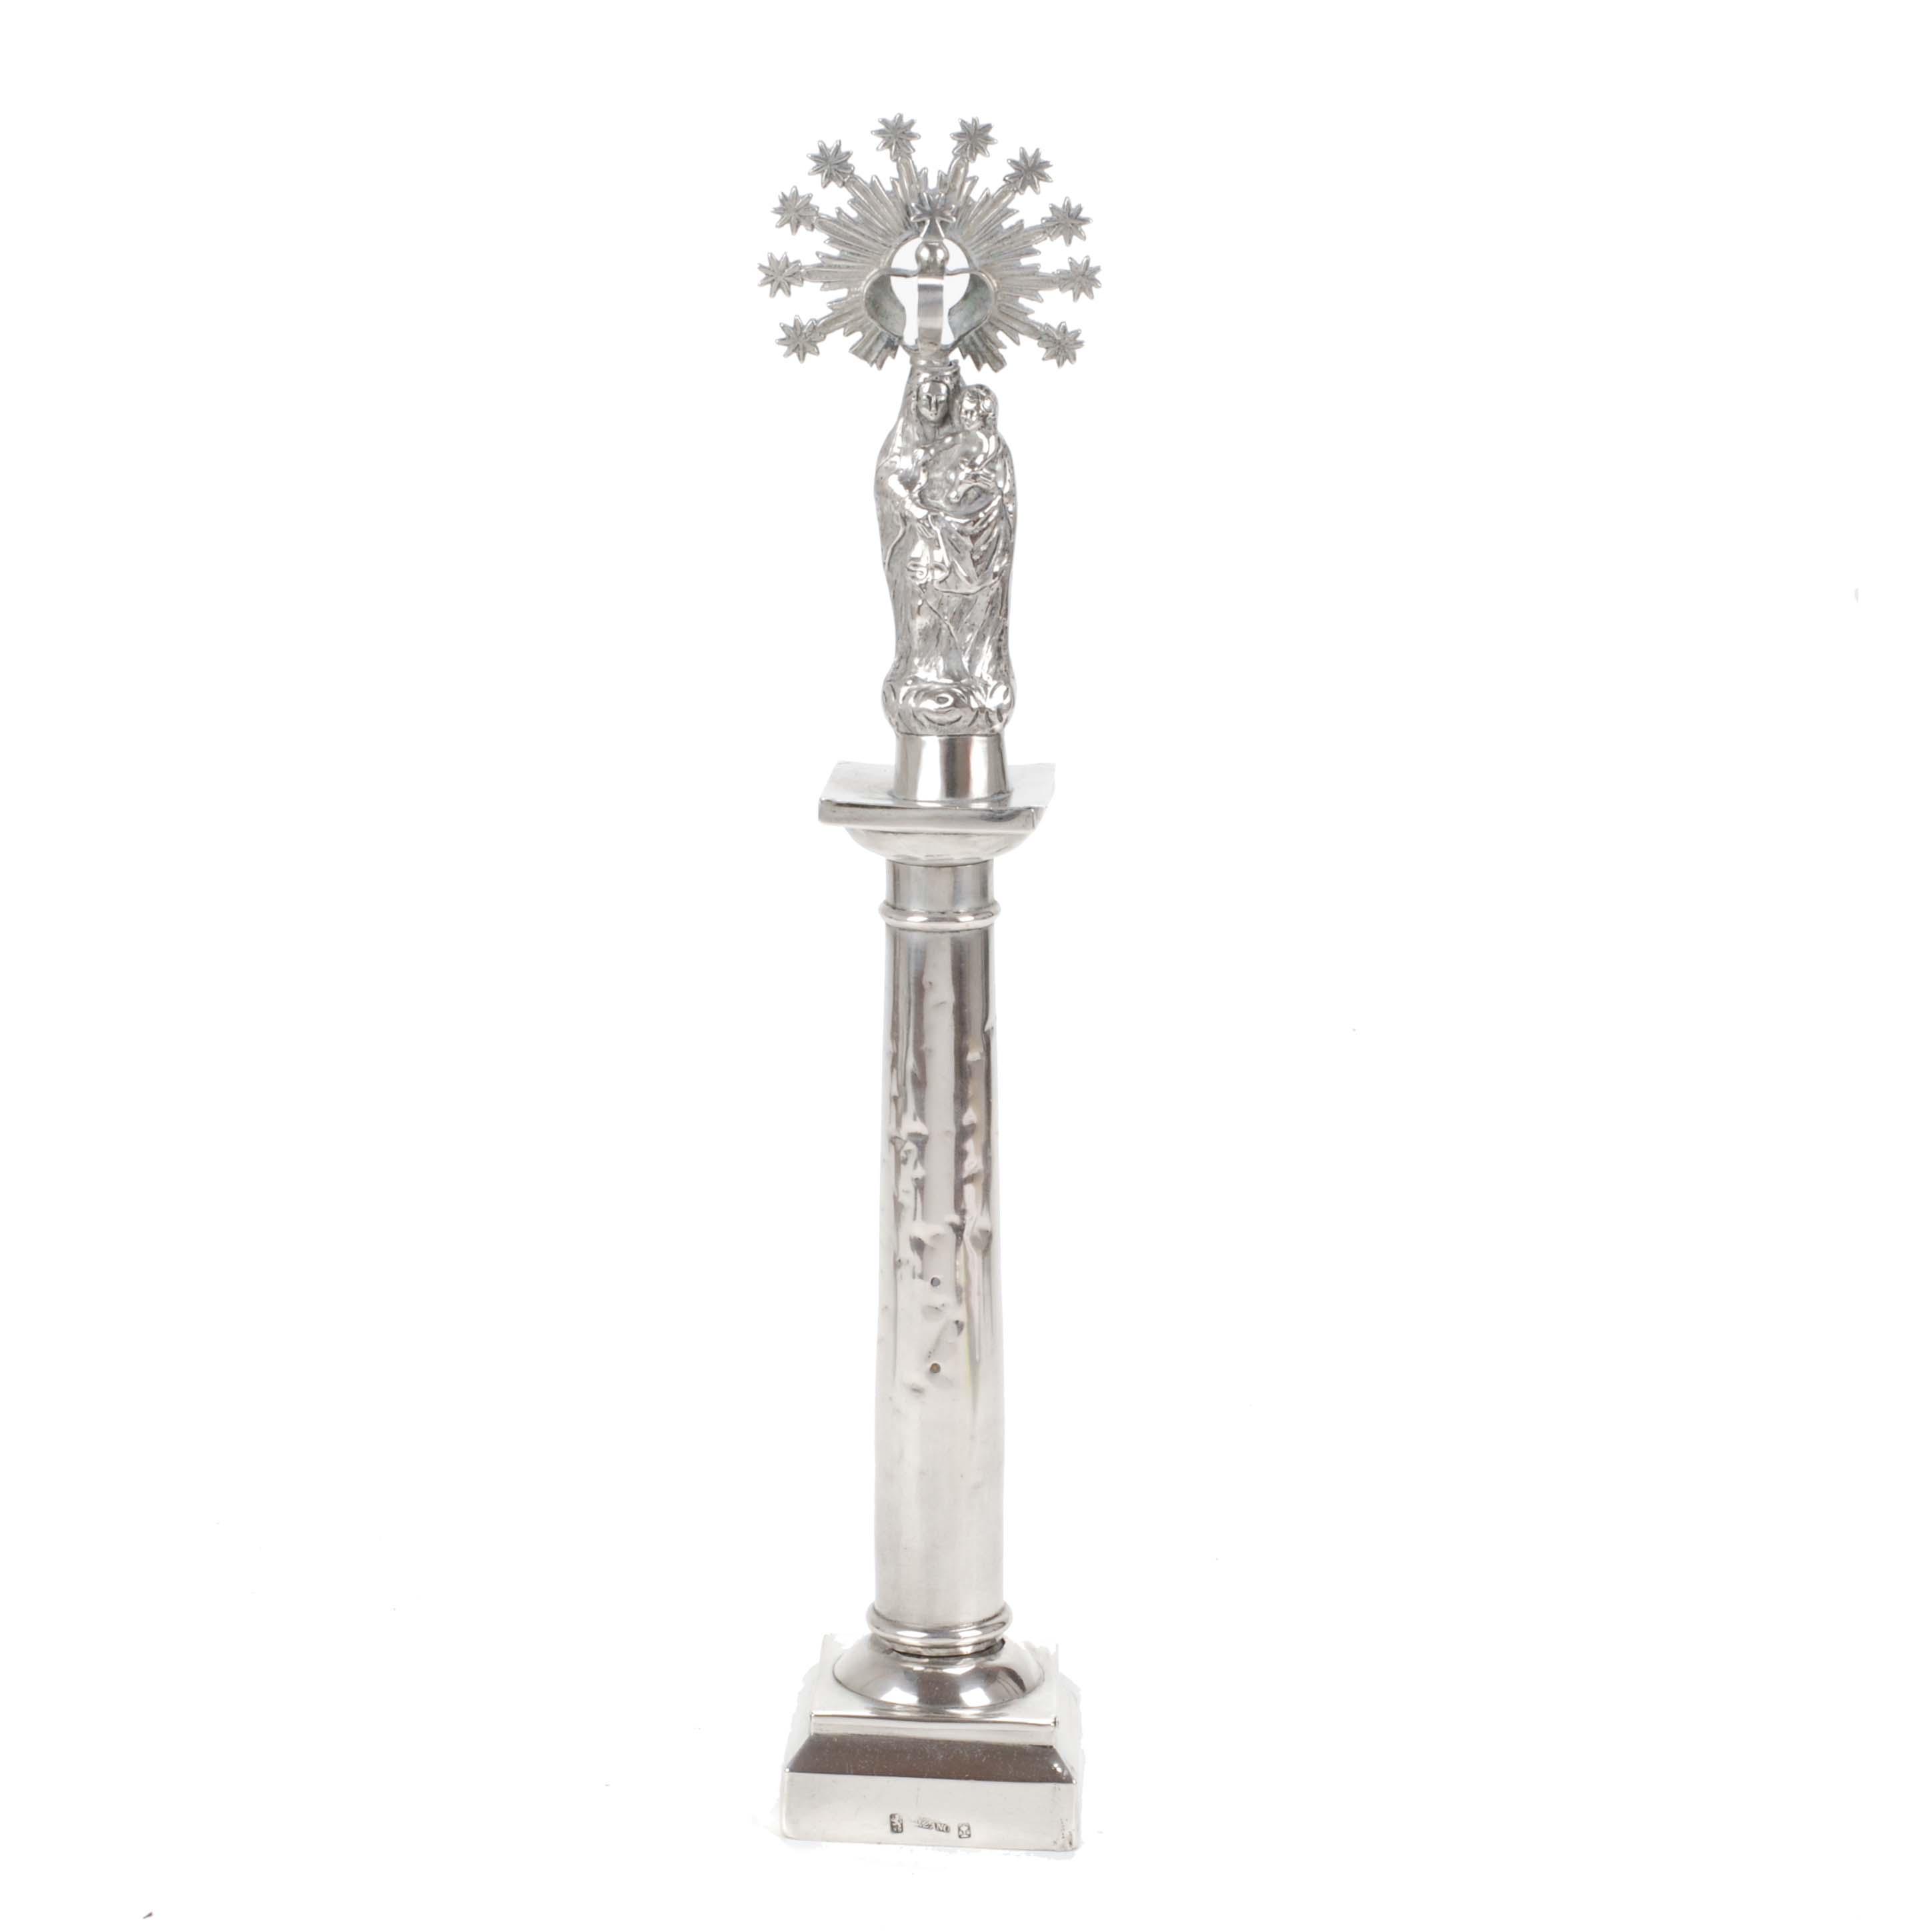 "OUR LADY OF THE PILLAR", SILVER, 19TH CENTURY